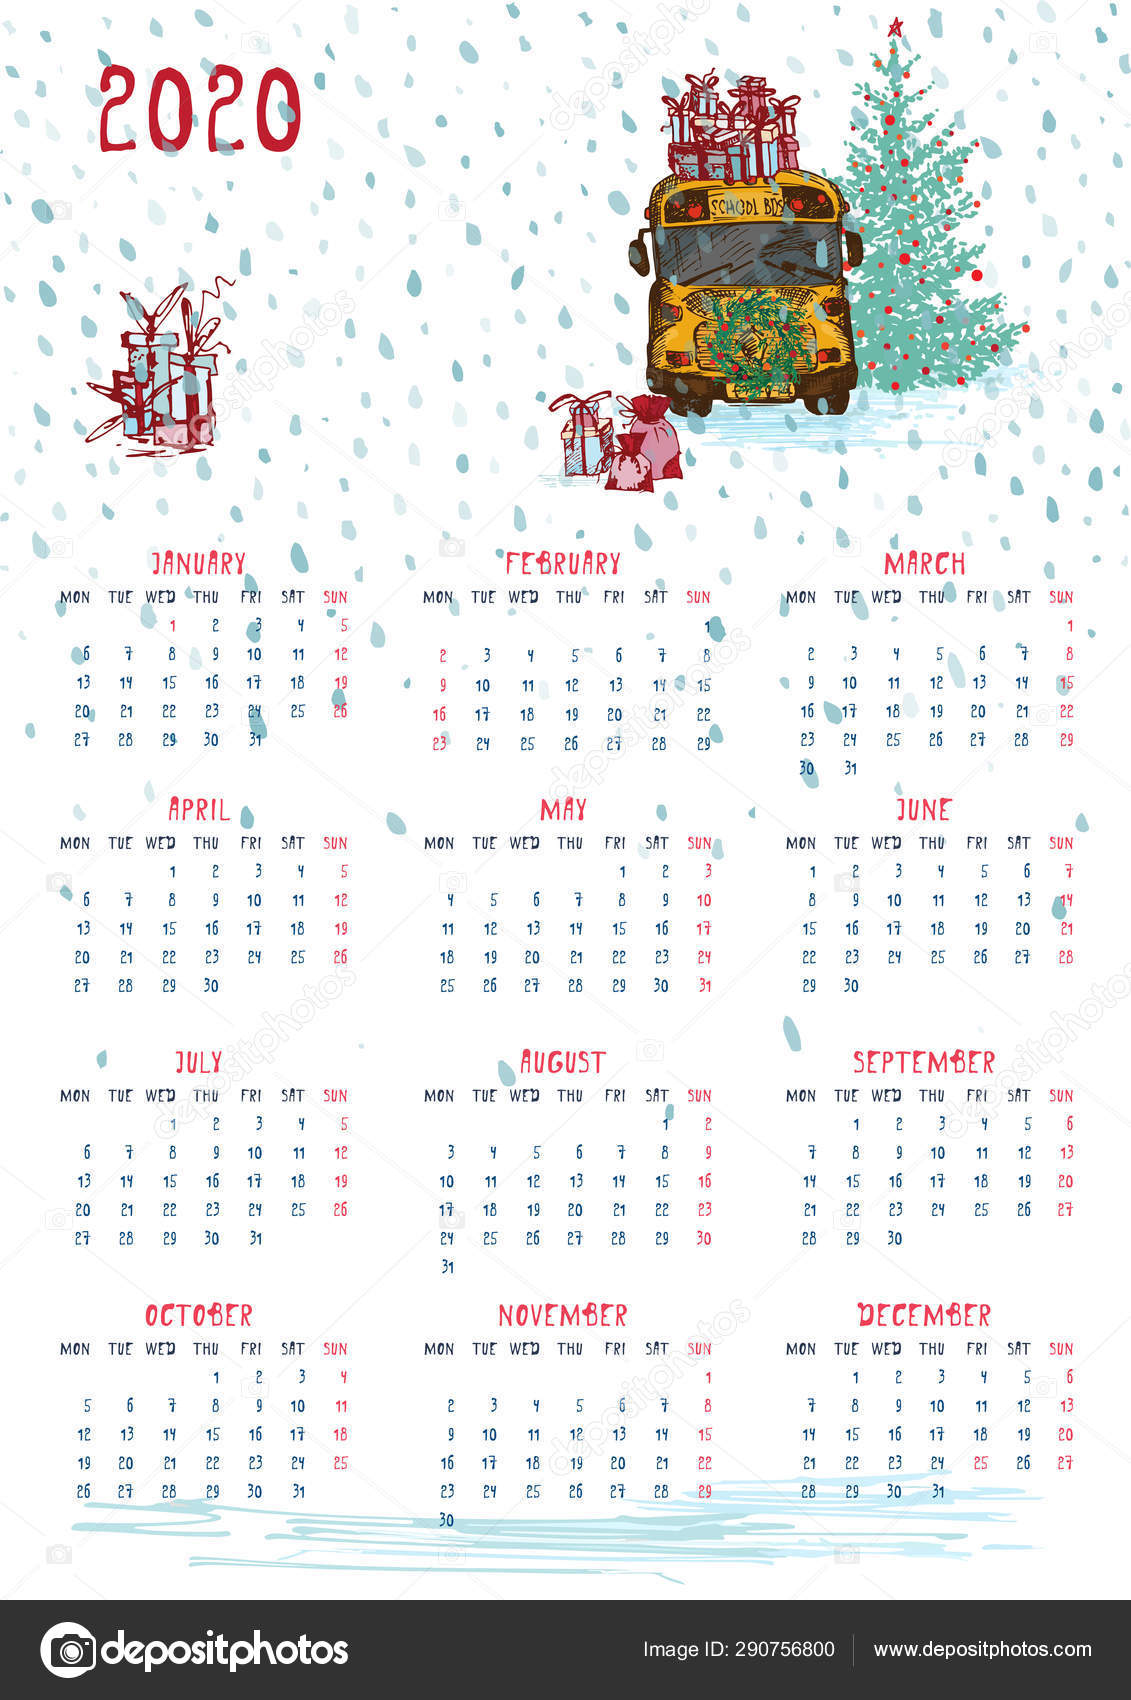 2020 Calendar Planner With Yellow School Bus New Year Tree